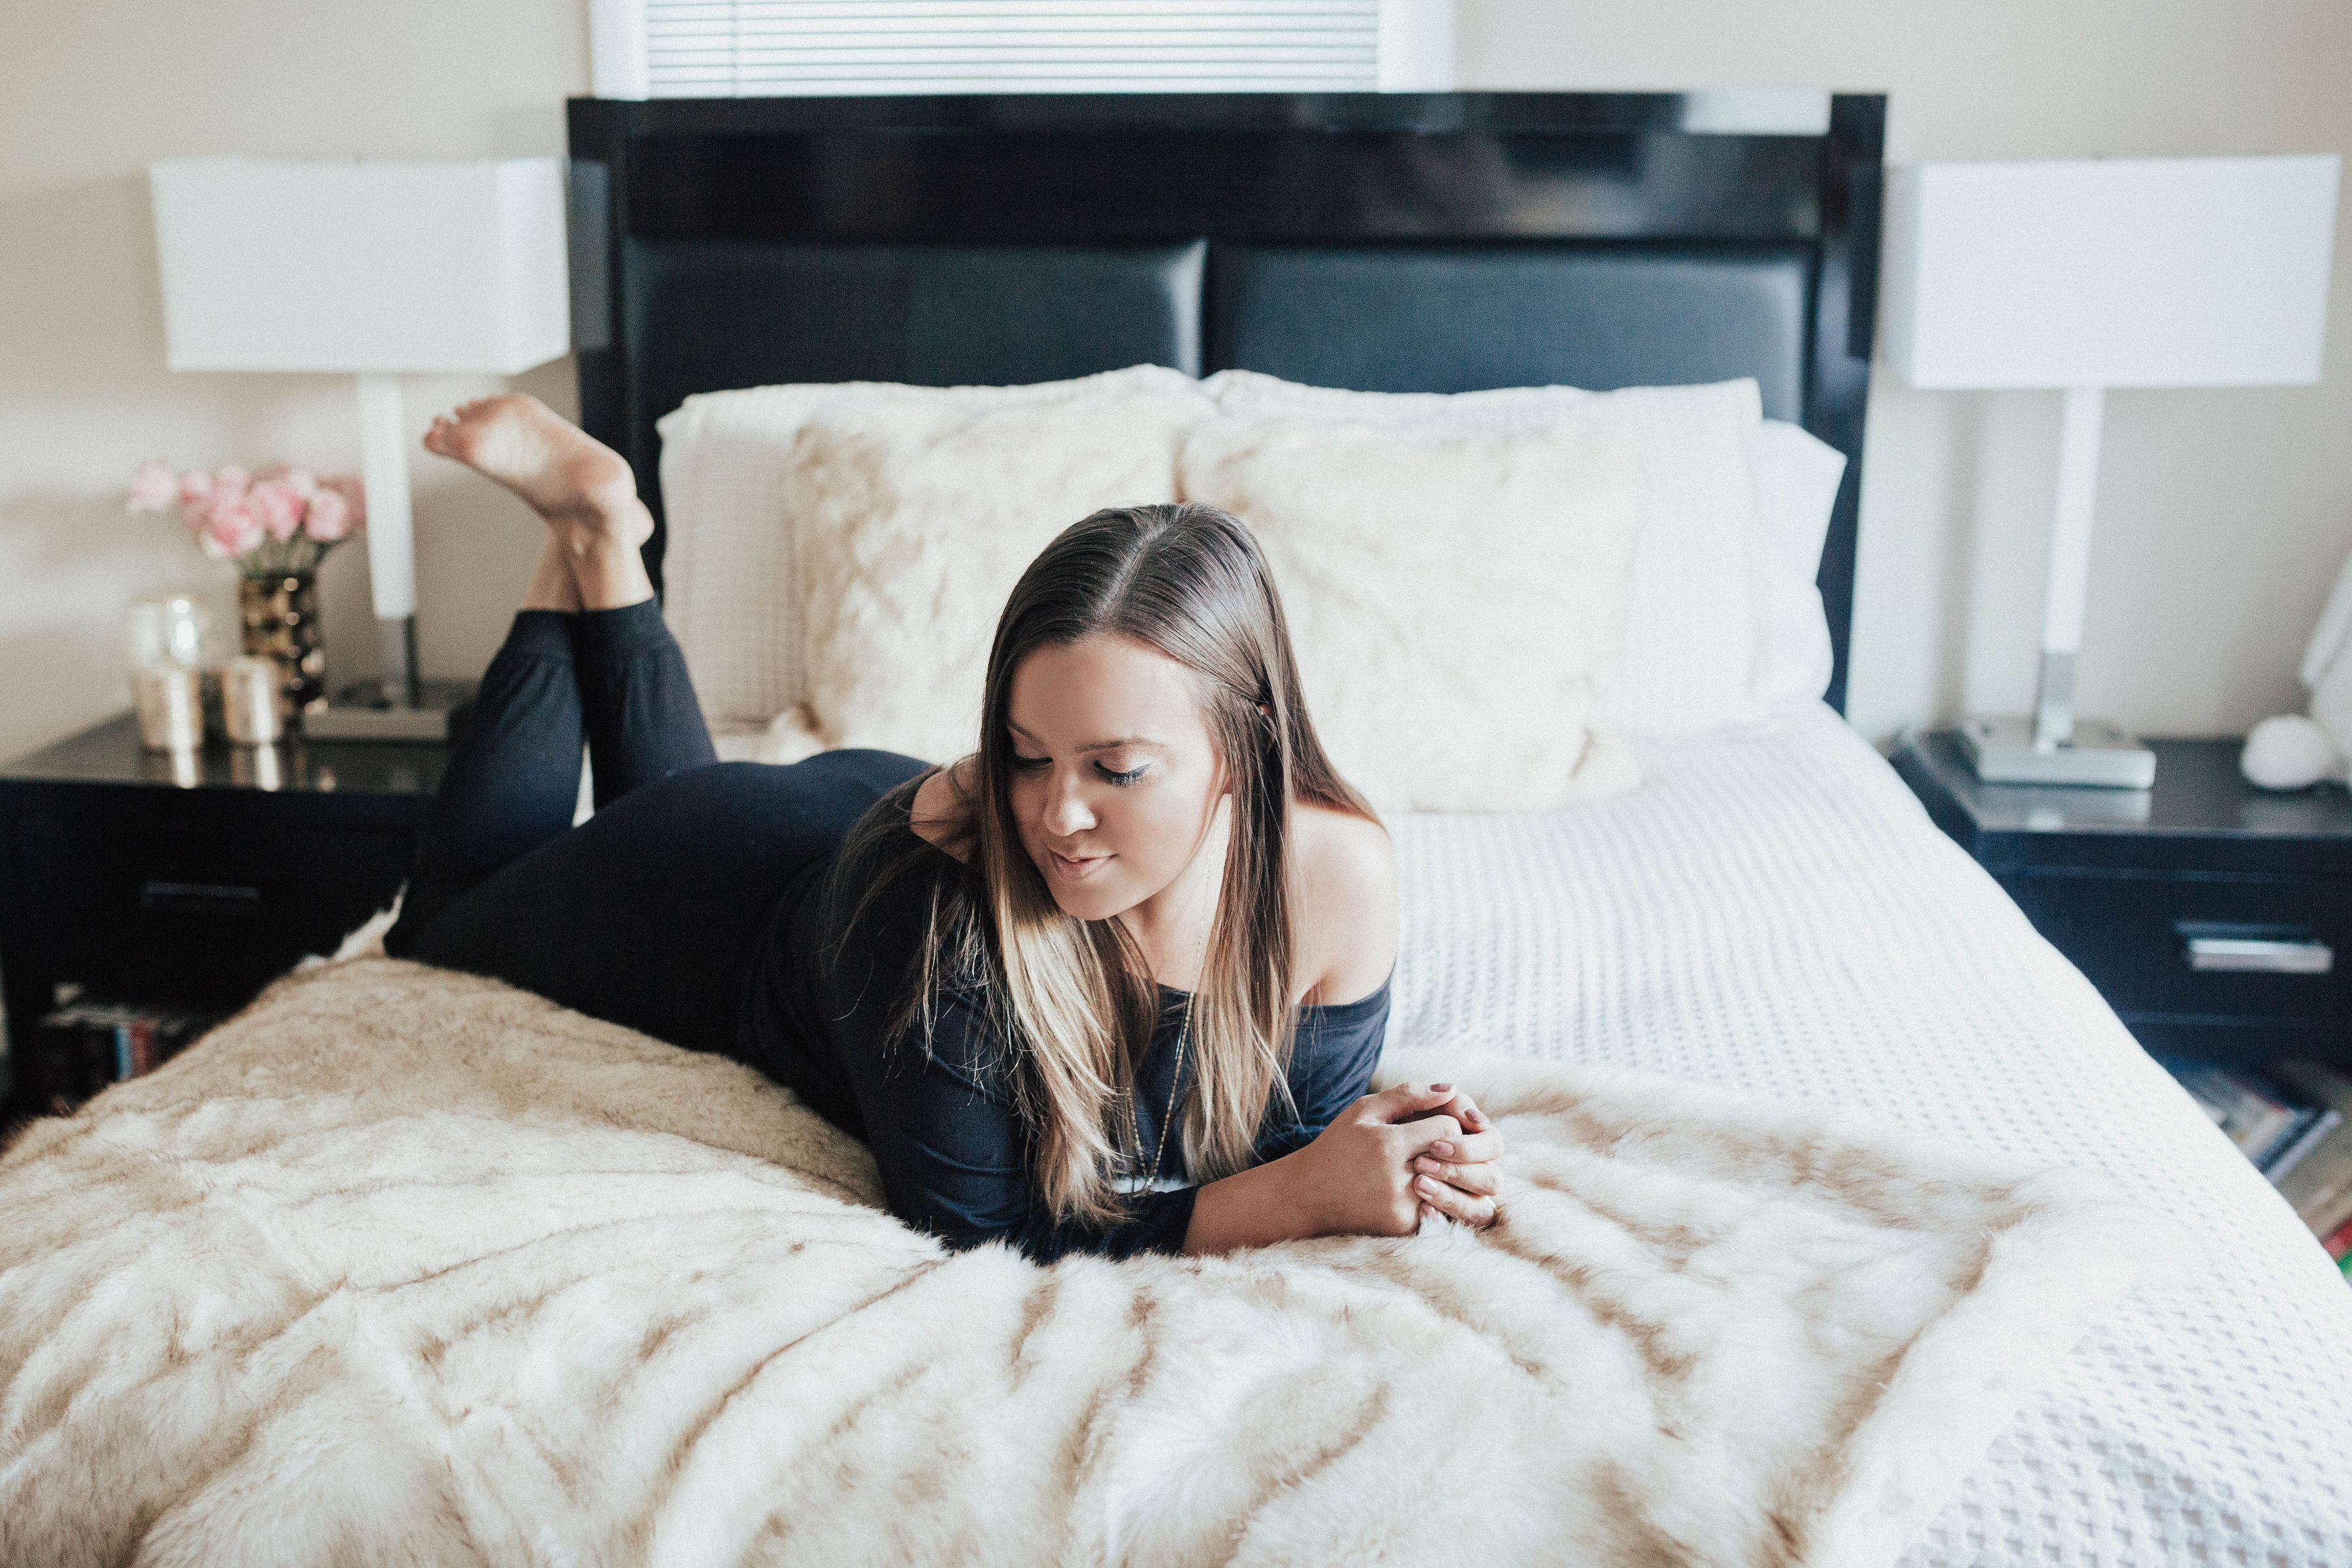 San Francisco blogger Ashley Zeal from Two Peas in a Prada shares her bedroom refresh with the Company Store. Find out how she turned her dark bedroom into a light happy space!